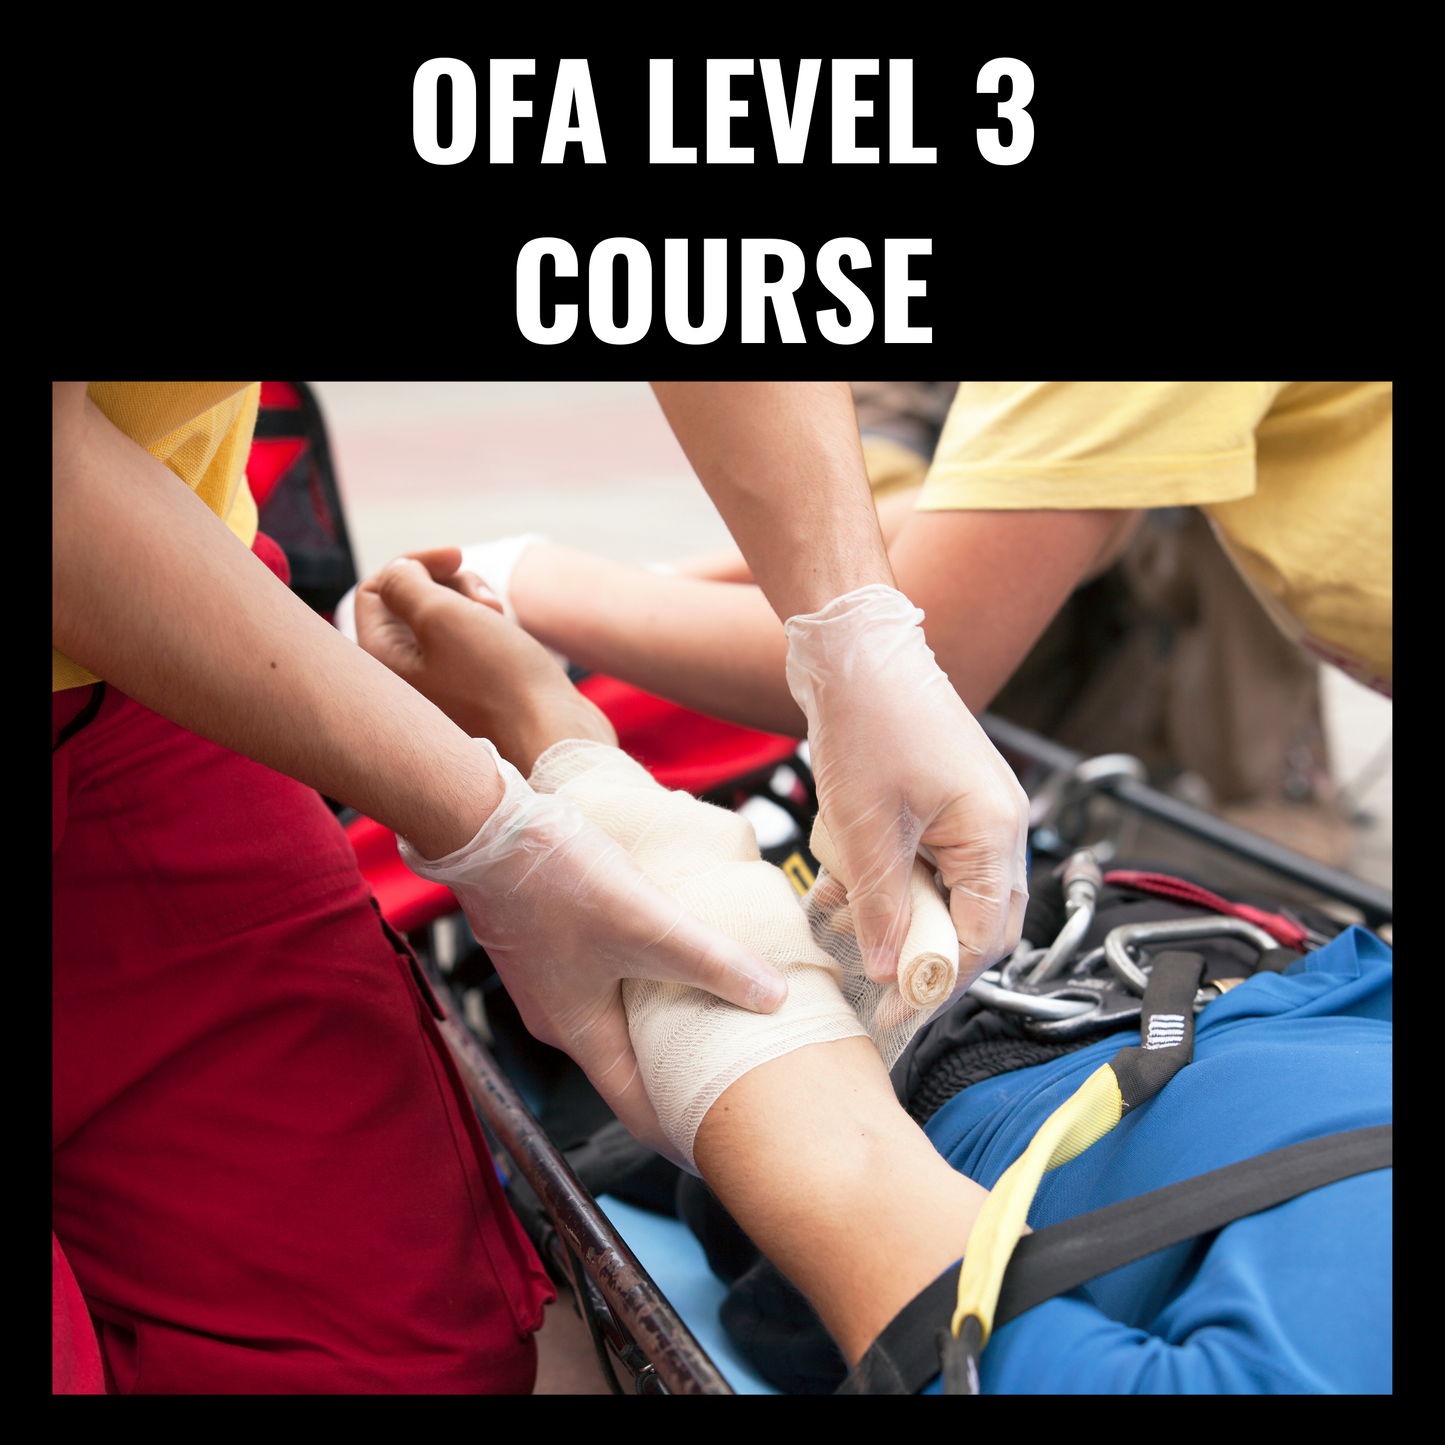 Occupational First Aid Level 3 (OFA 3): Prince Rupert, BC